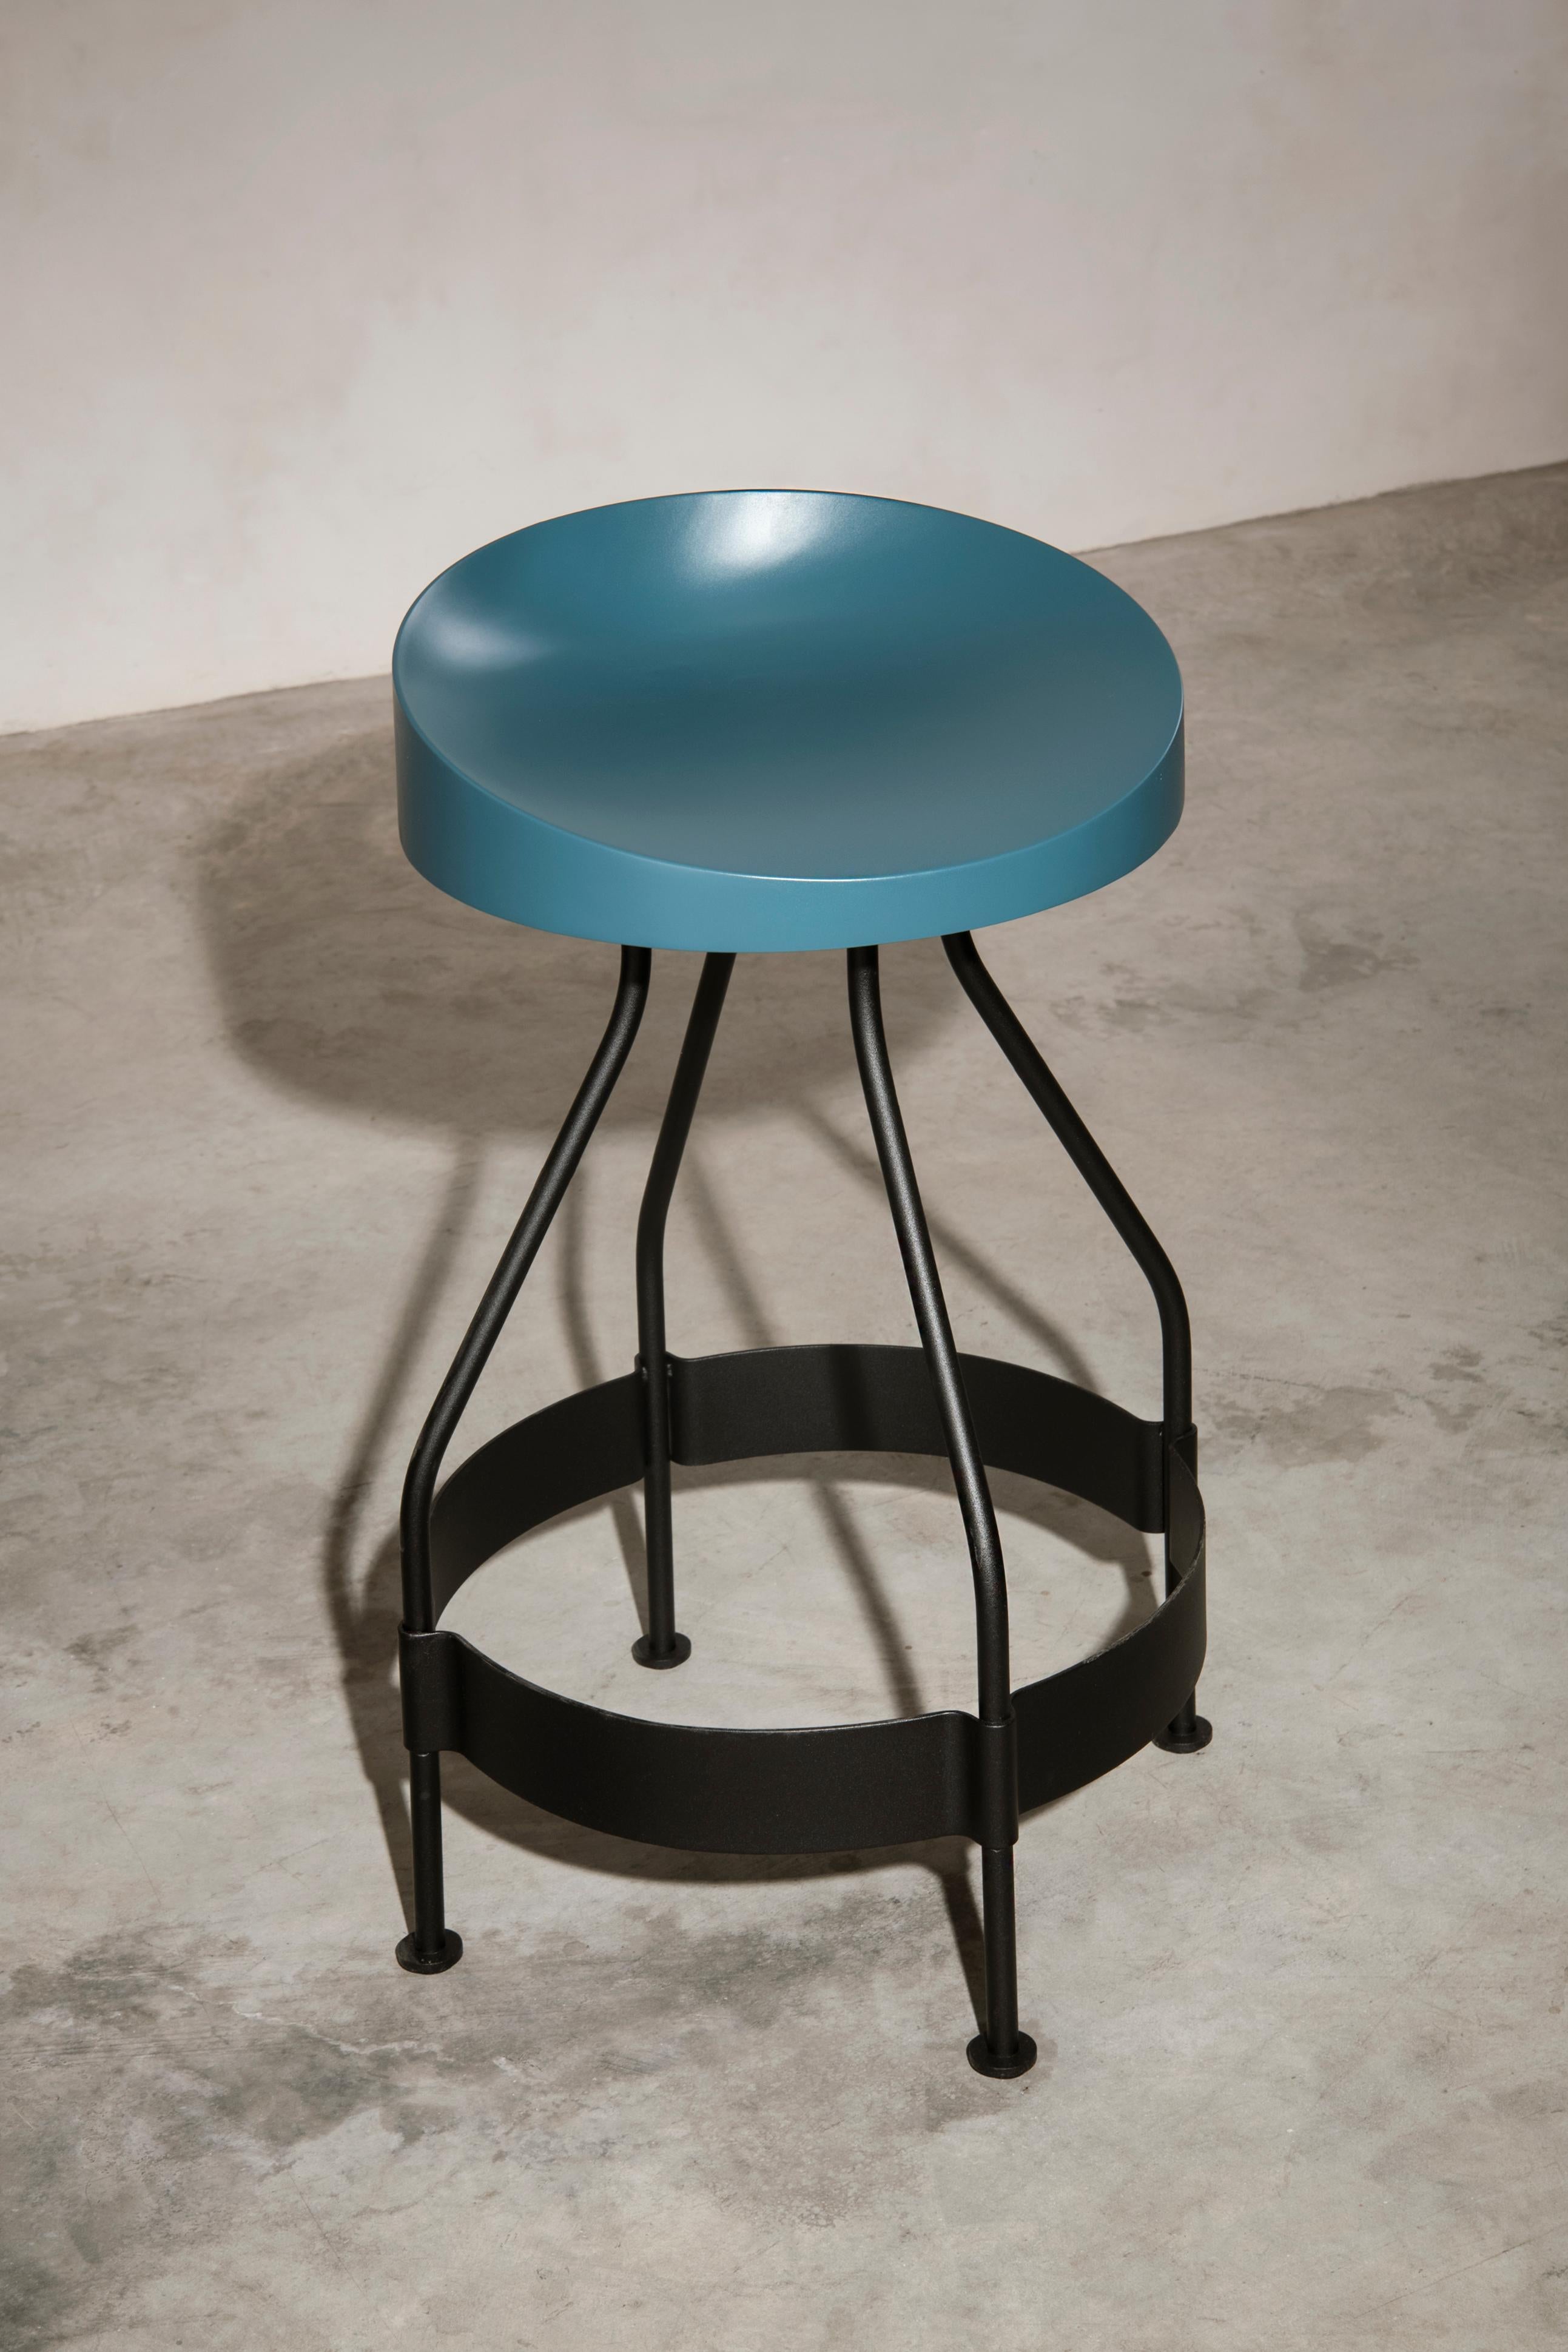 La Manufacture-Paris Olindias Swivel Stool IN OR OUTDOOR by Luca Nichetto In New Condition For Sale In New York, NY